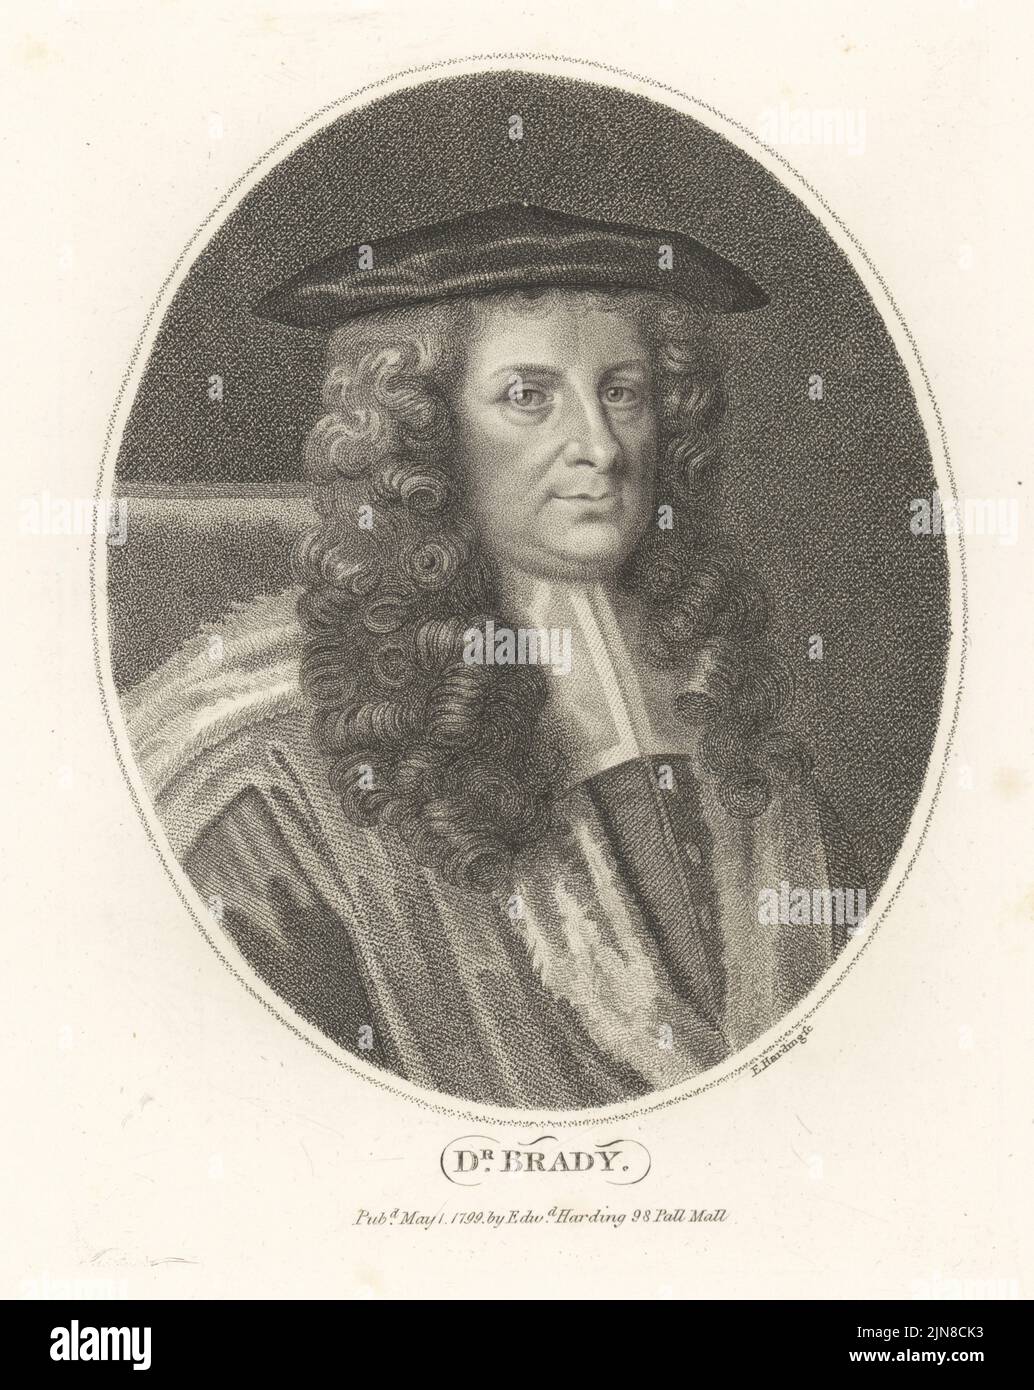 Dr. Robert Brady, English physician and historian, educated at Caius College, Cambridge University, 1627-1700. Physician in ordinary to King James II. In wig and velvet cap and academic ceremonial robes. Dr Brady. Copperplate engraving by Edward Harding from John Adolphus’ The British Cabinet, containing Portraits of Illustrious Personages, printed by T. Bensley for E. Harding, 98 Pall Mall, London, 1799. Stock Photo